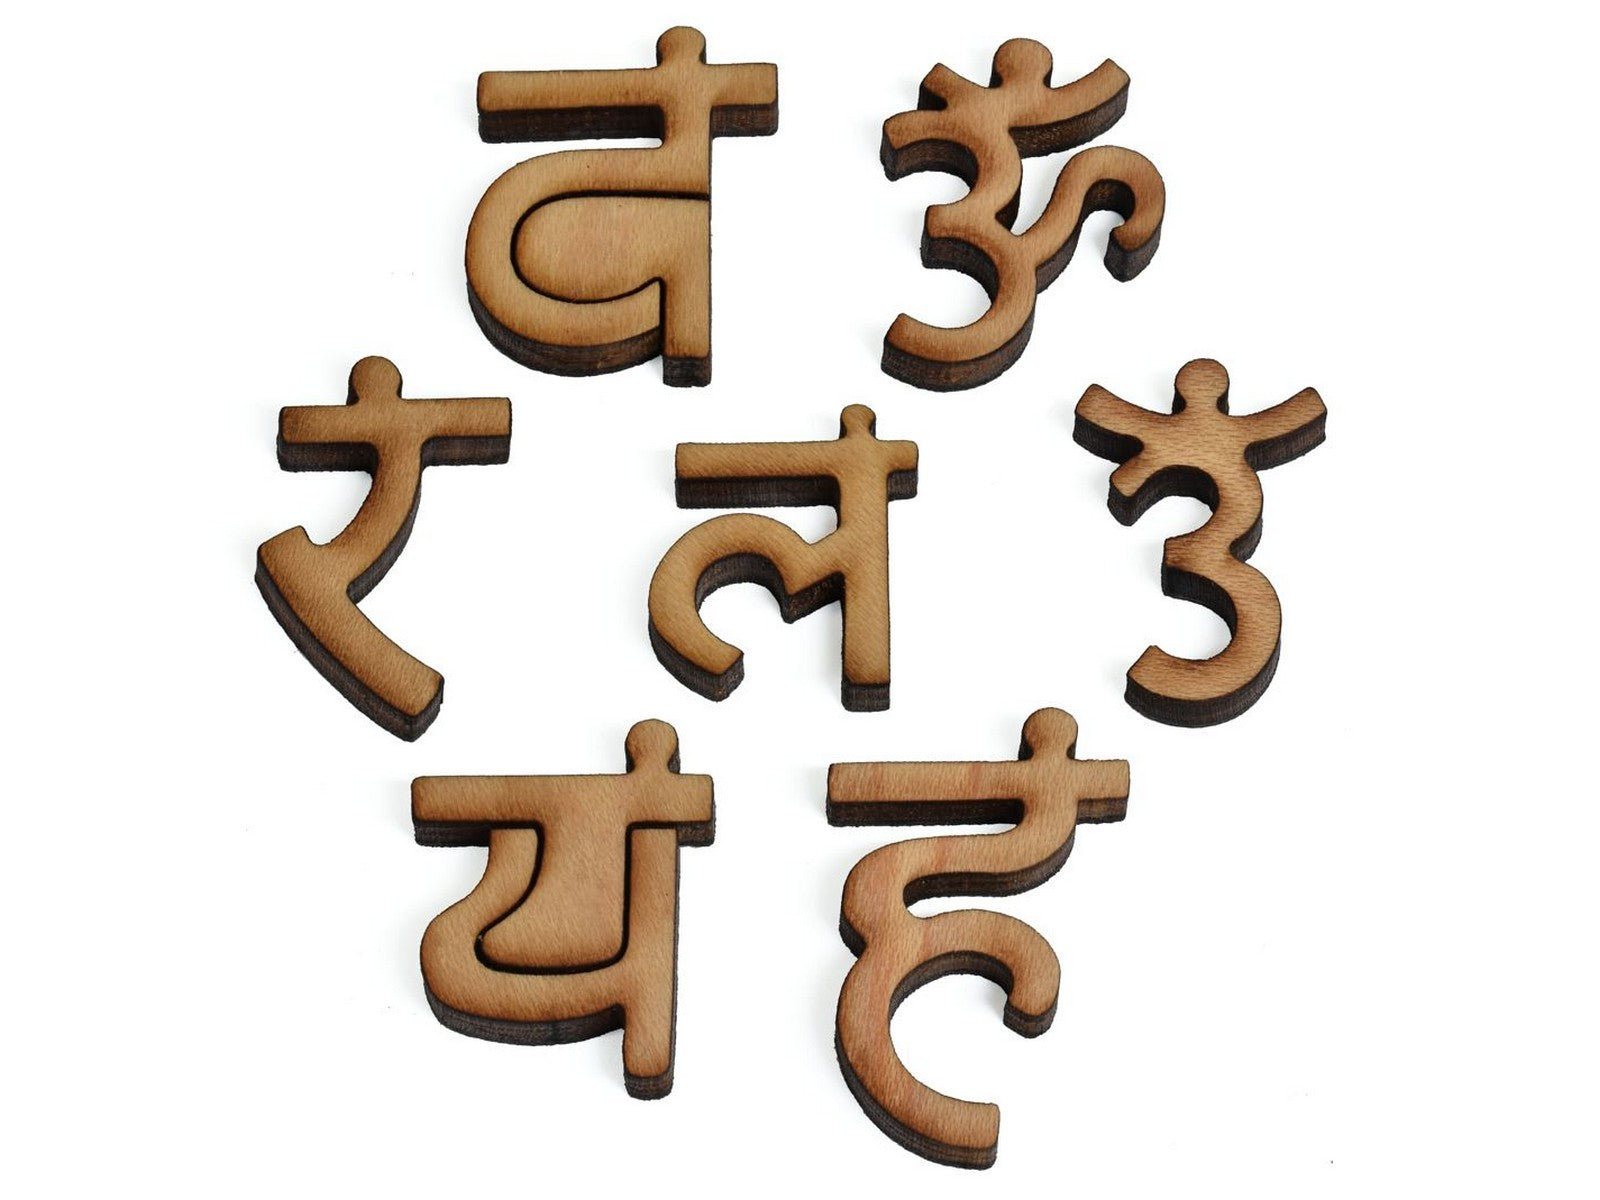 A closeup of pieces showing the Sanskrit letters associated with the seven chakras.